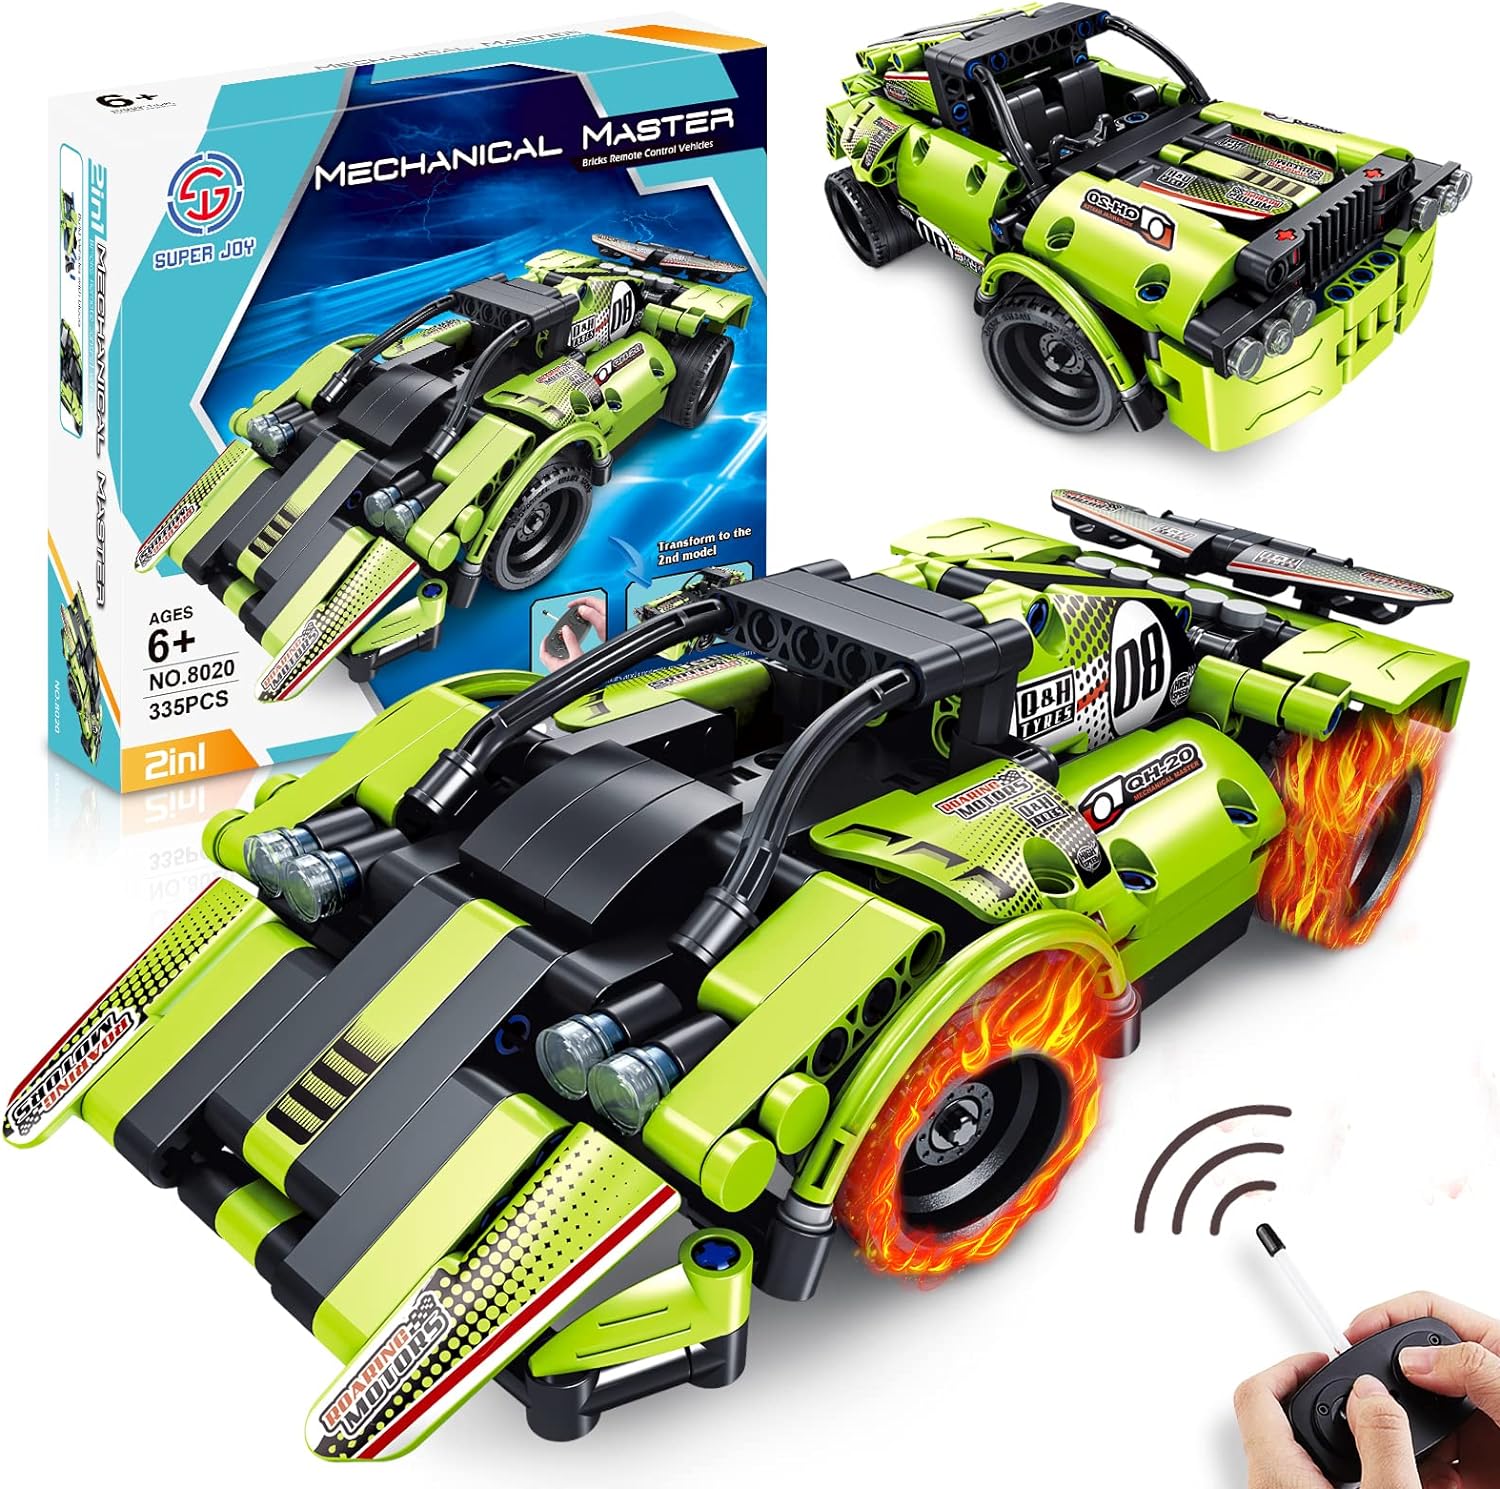 STEM Building Toys for Kids, 335 Piece Building Kit 2 in 1 Remote Control Racing Car Snap Together Engineering Kits Early Learning Racecar Building Blocks Best Gift for 6Year Old Boys and Girls